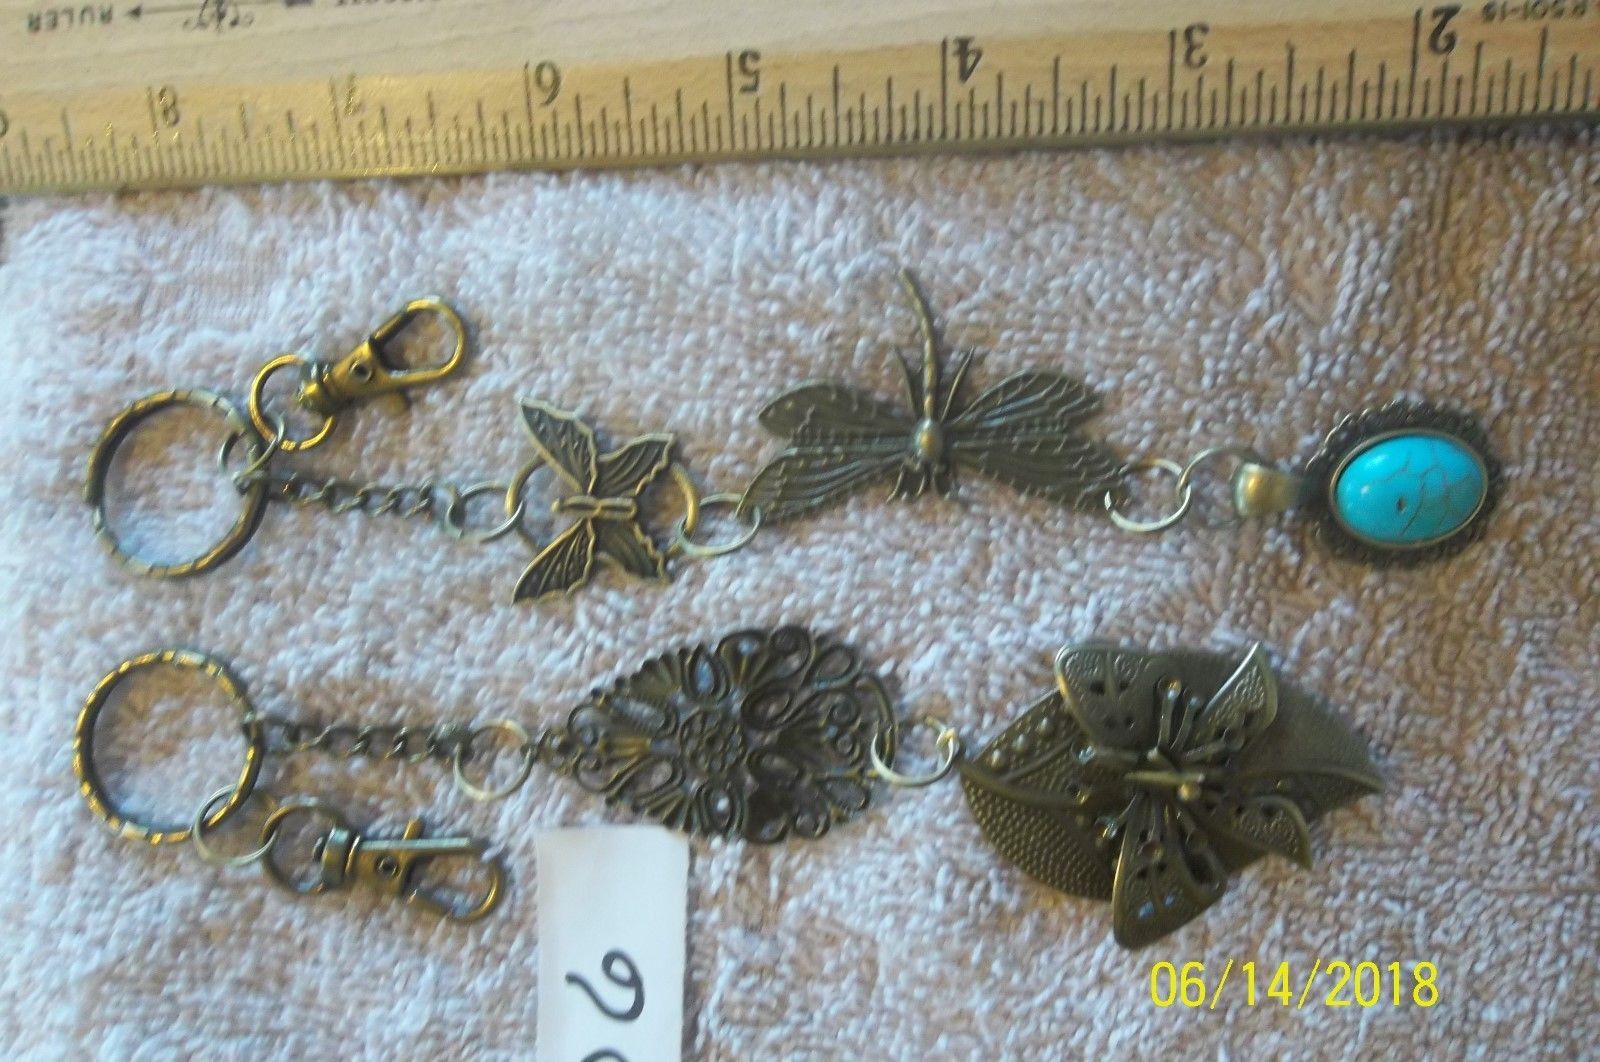 Primary image for <>< purse jewlrey bronze color keychain backpack filigree charms lot 06 lot of 2